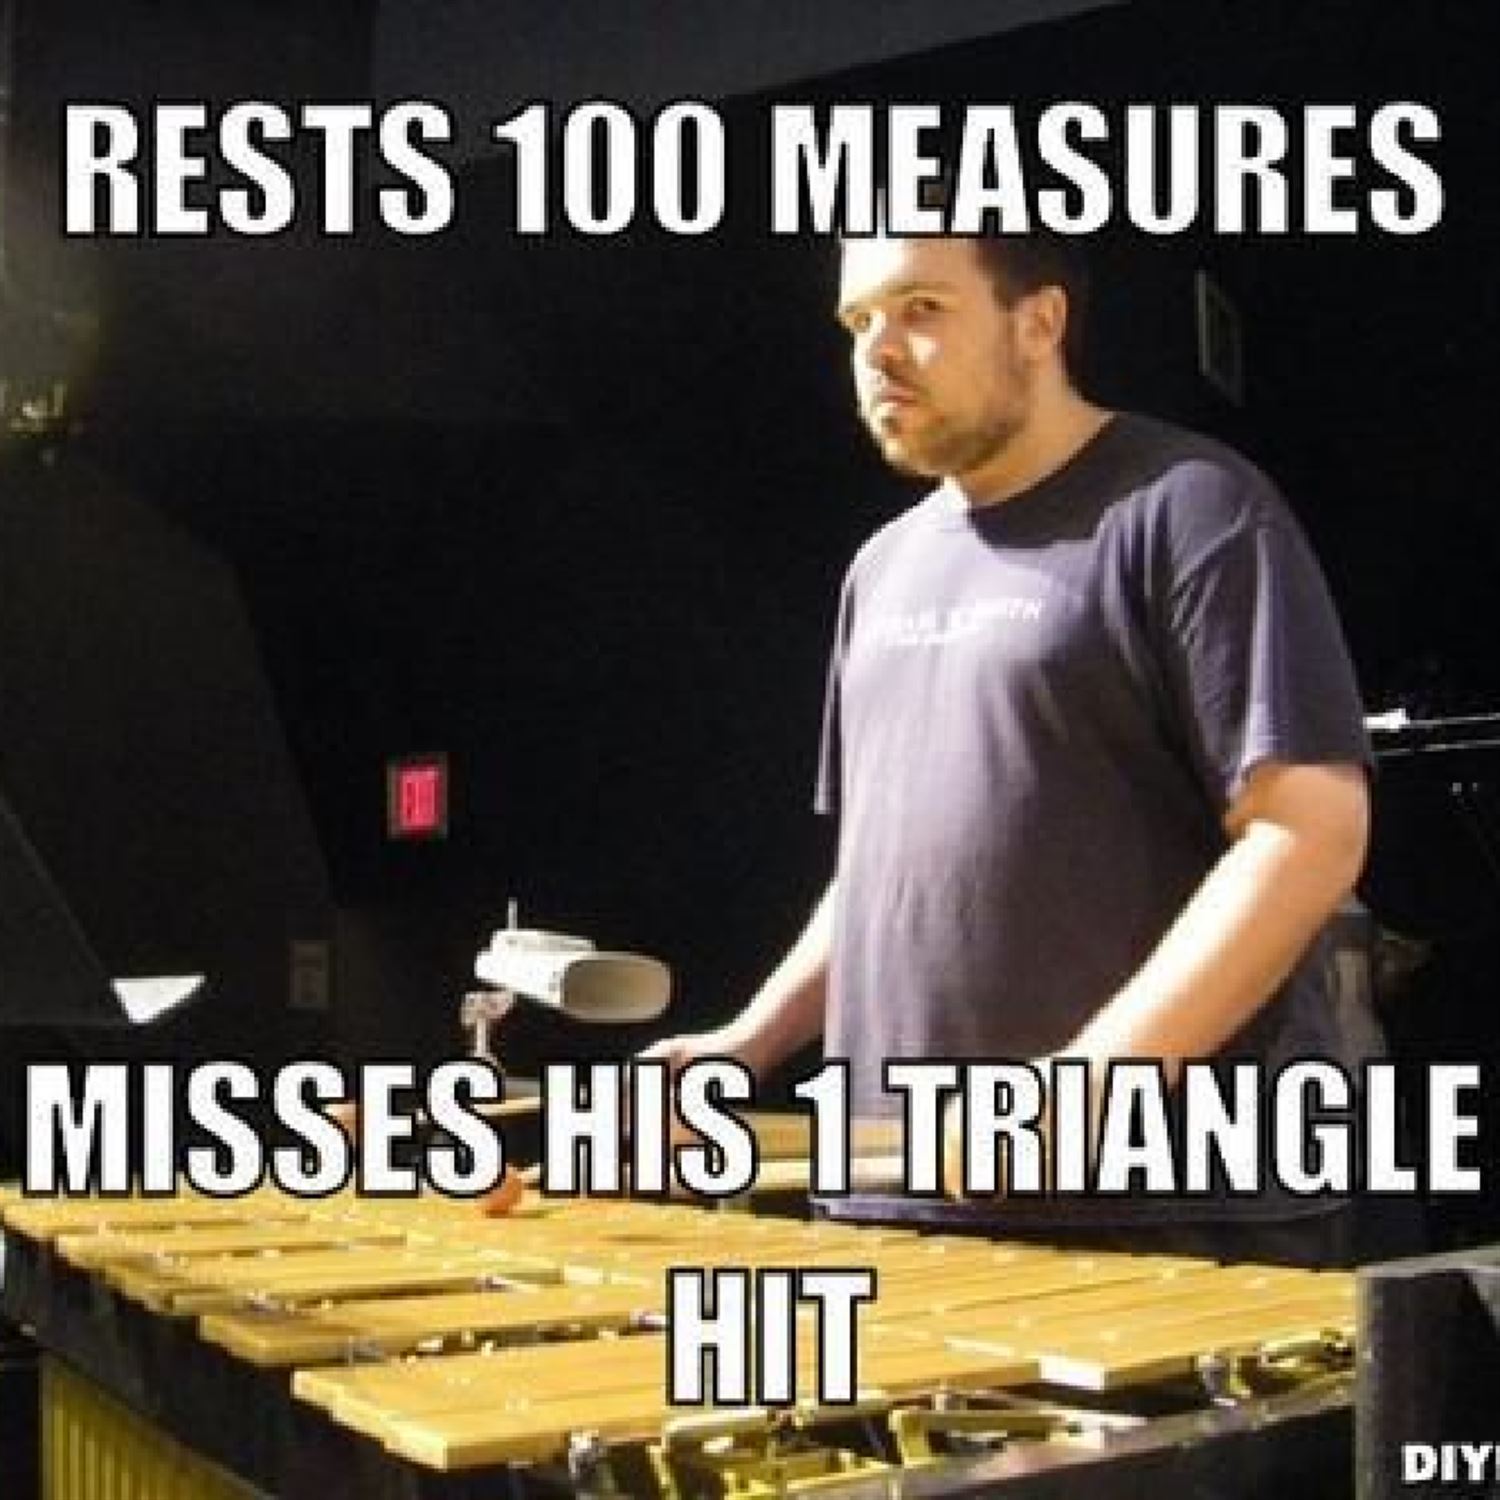 Just not our average percussion